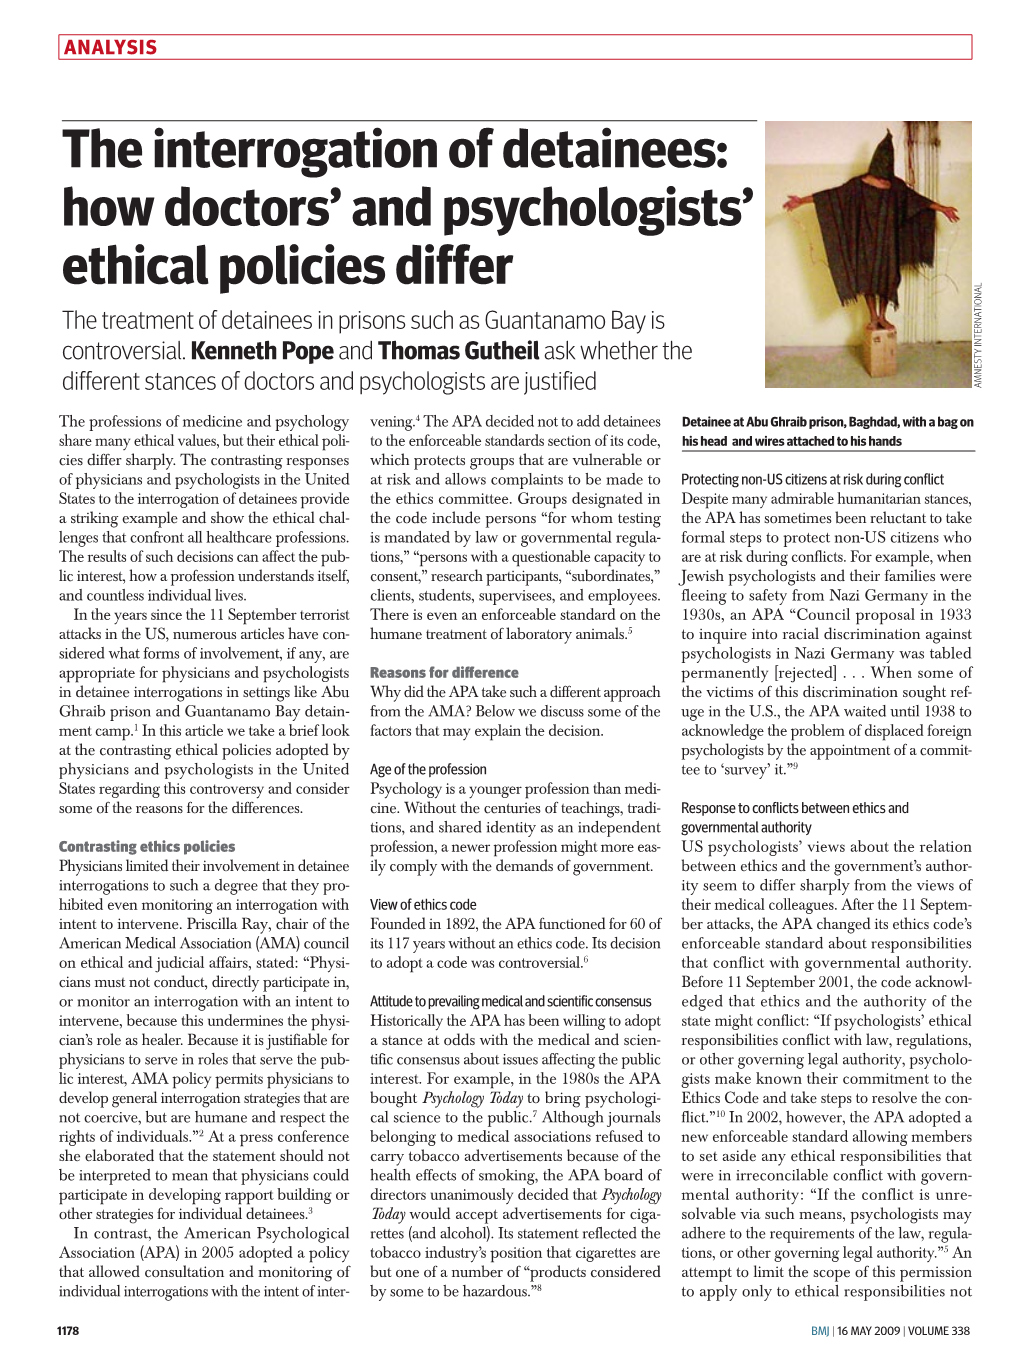 The Interrogation of Detainees: How Doctors' and Psychologists' Ethical